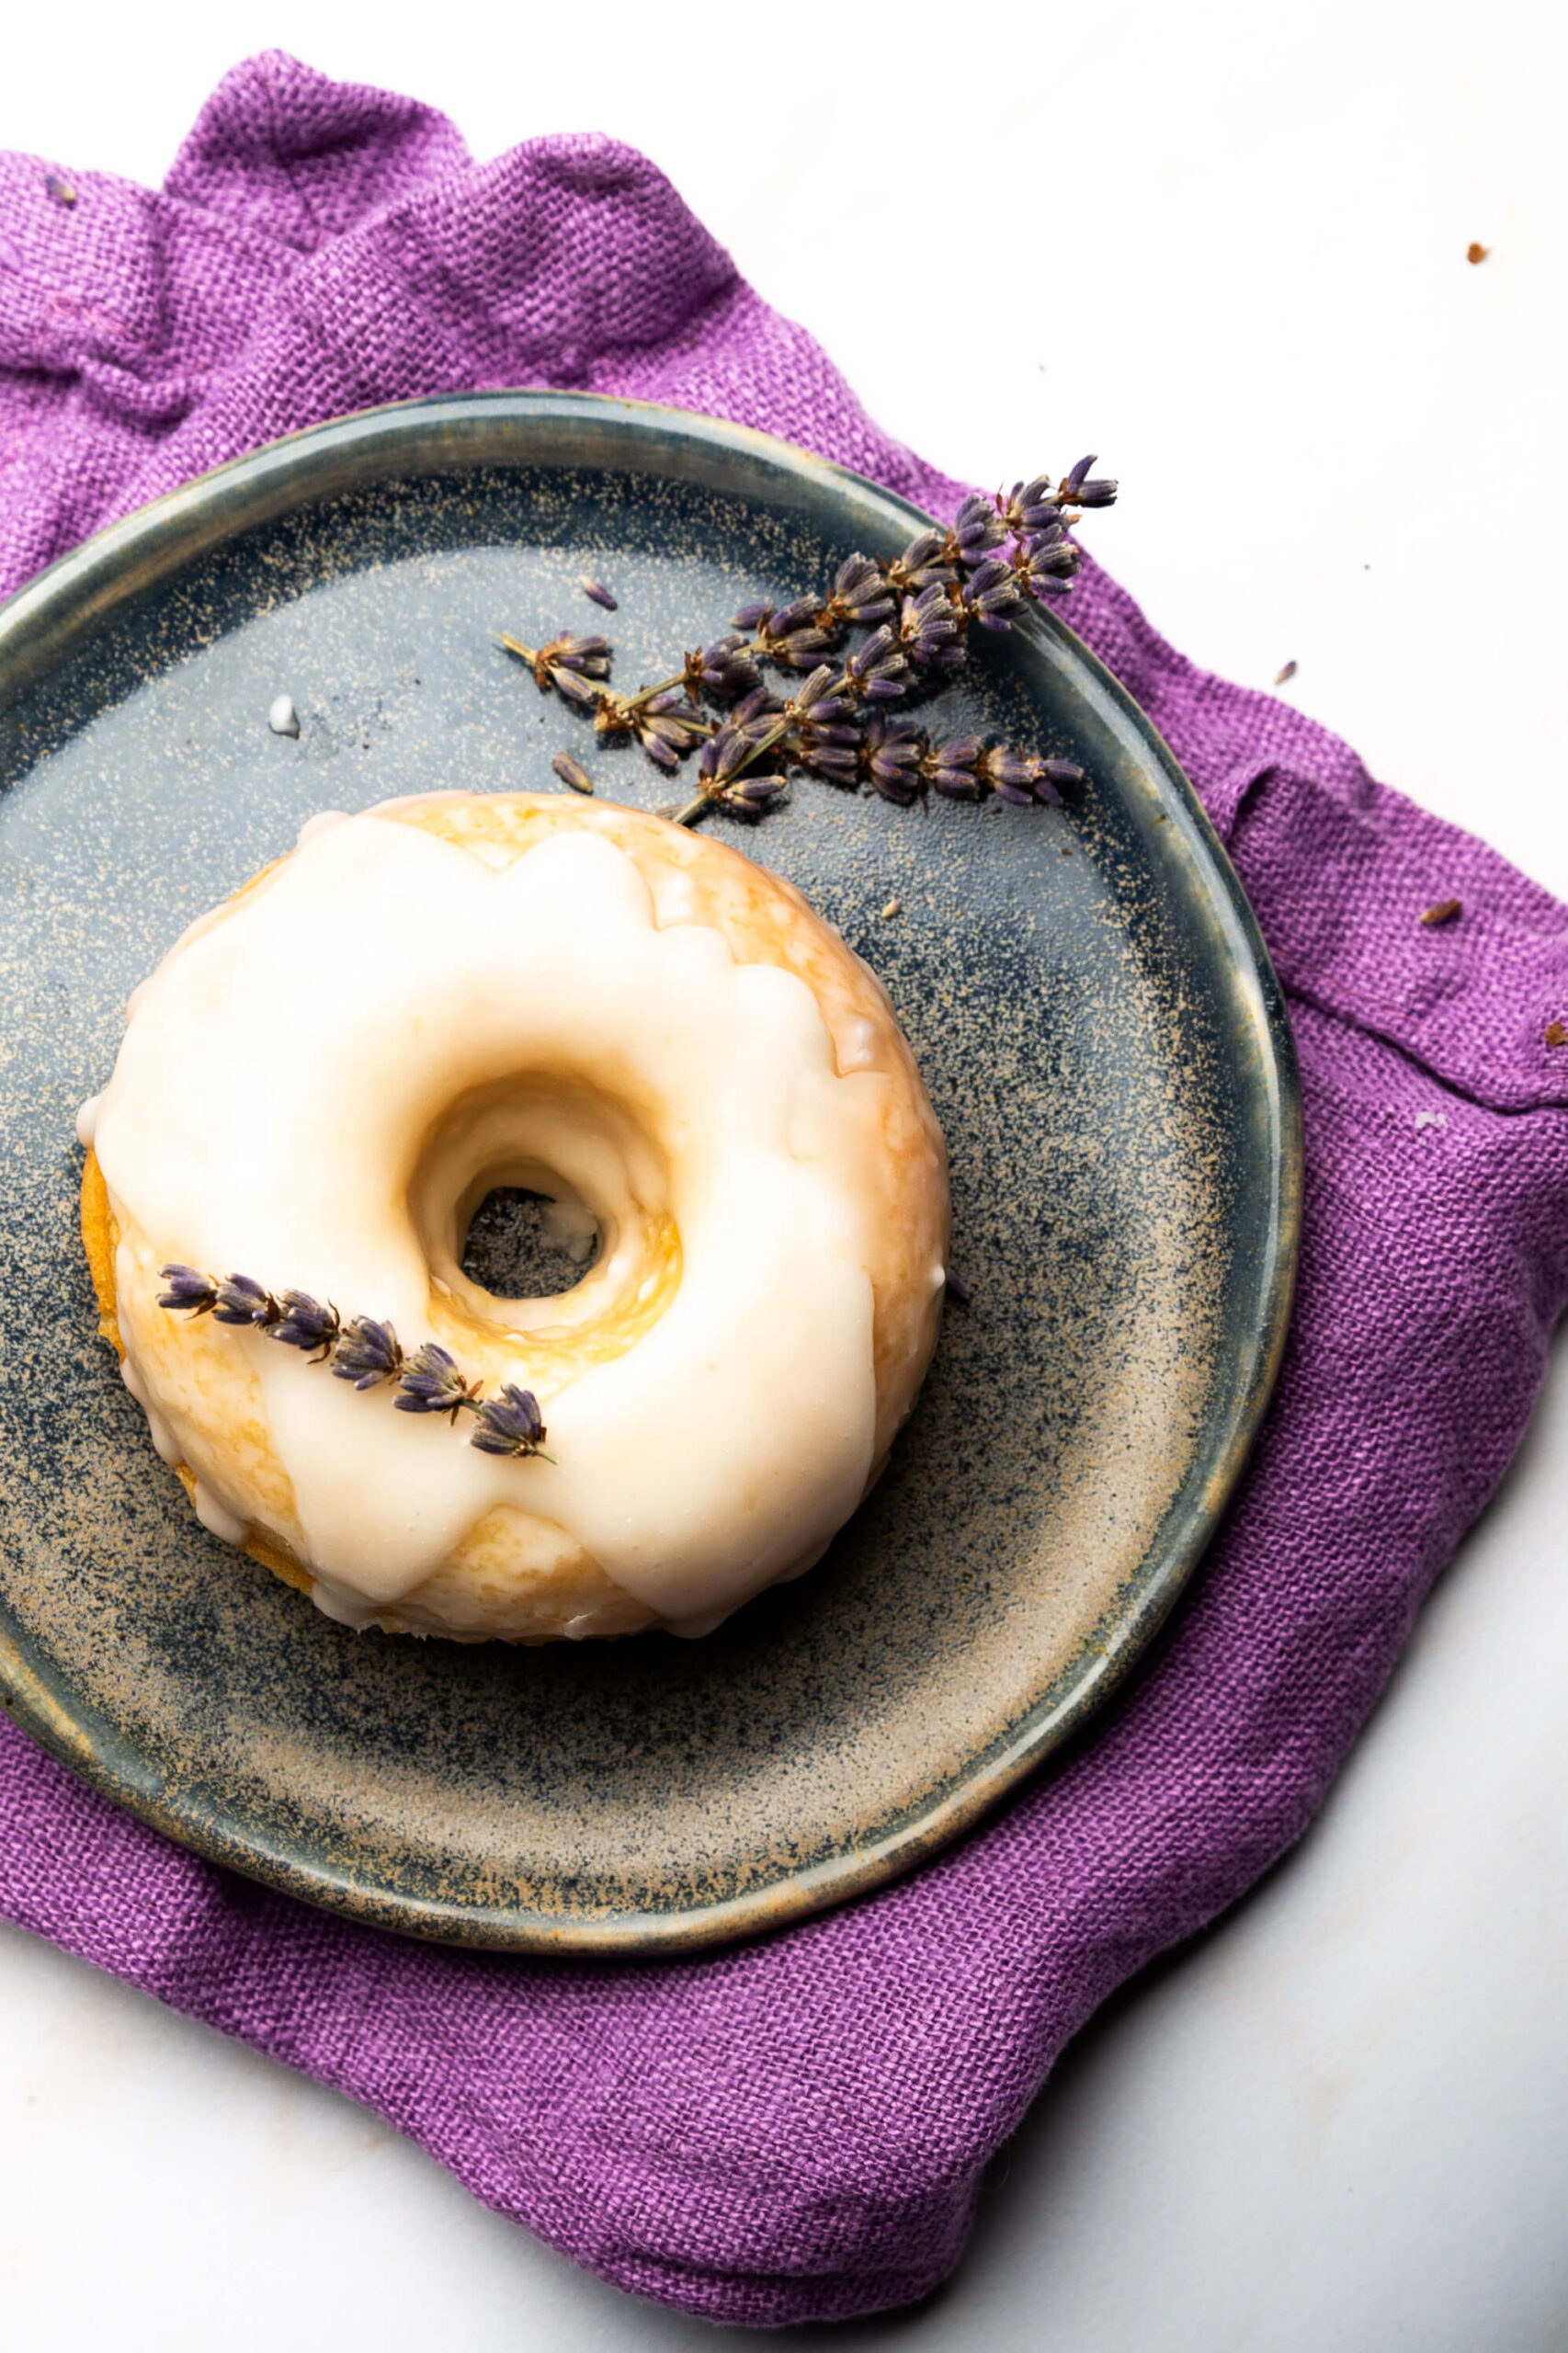 A vegan donut with lavender icing on a plate.